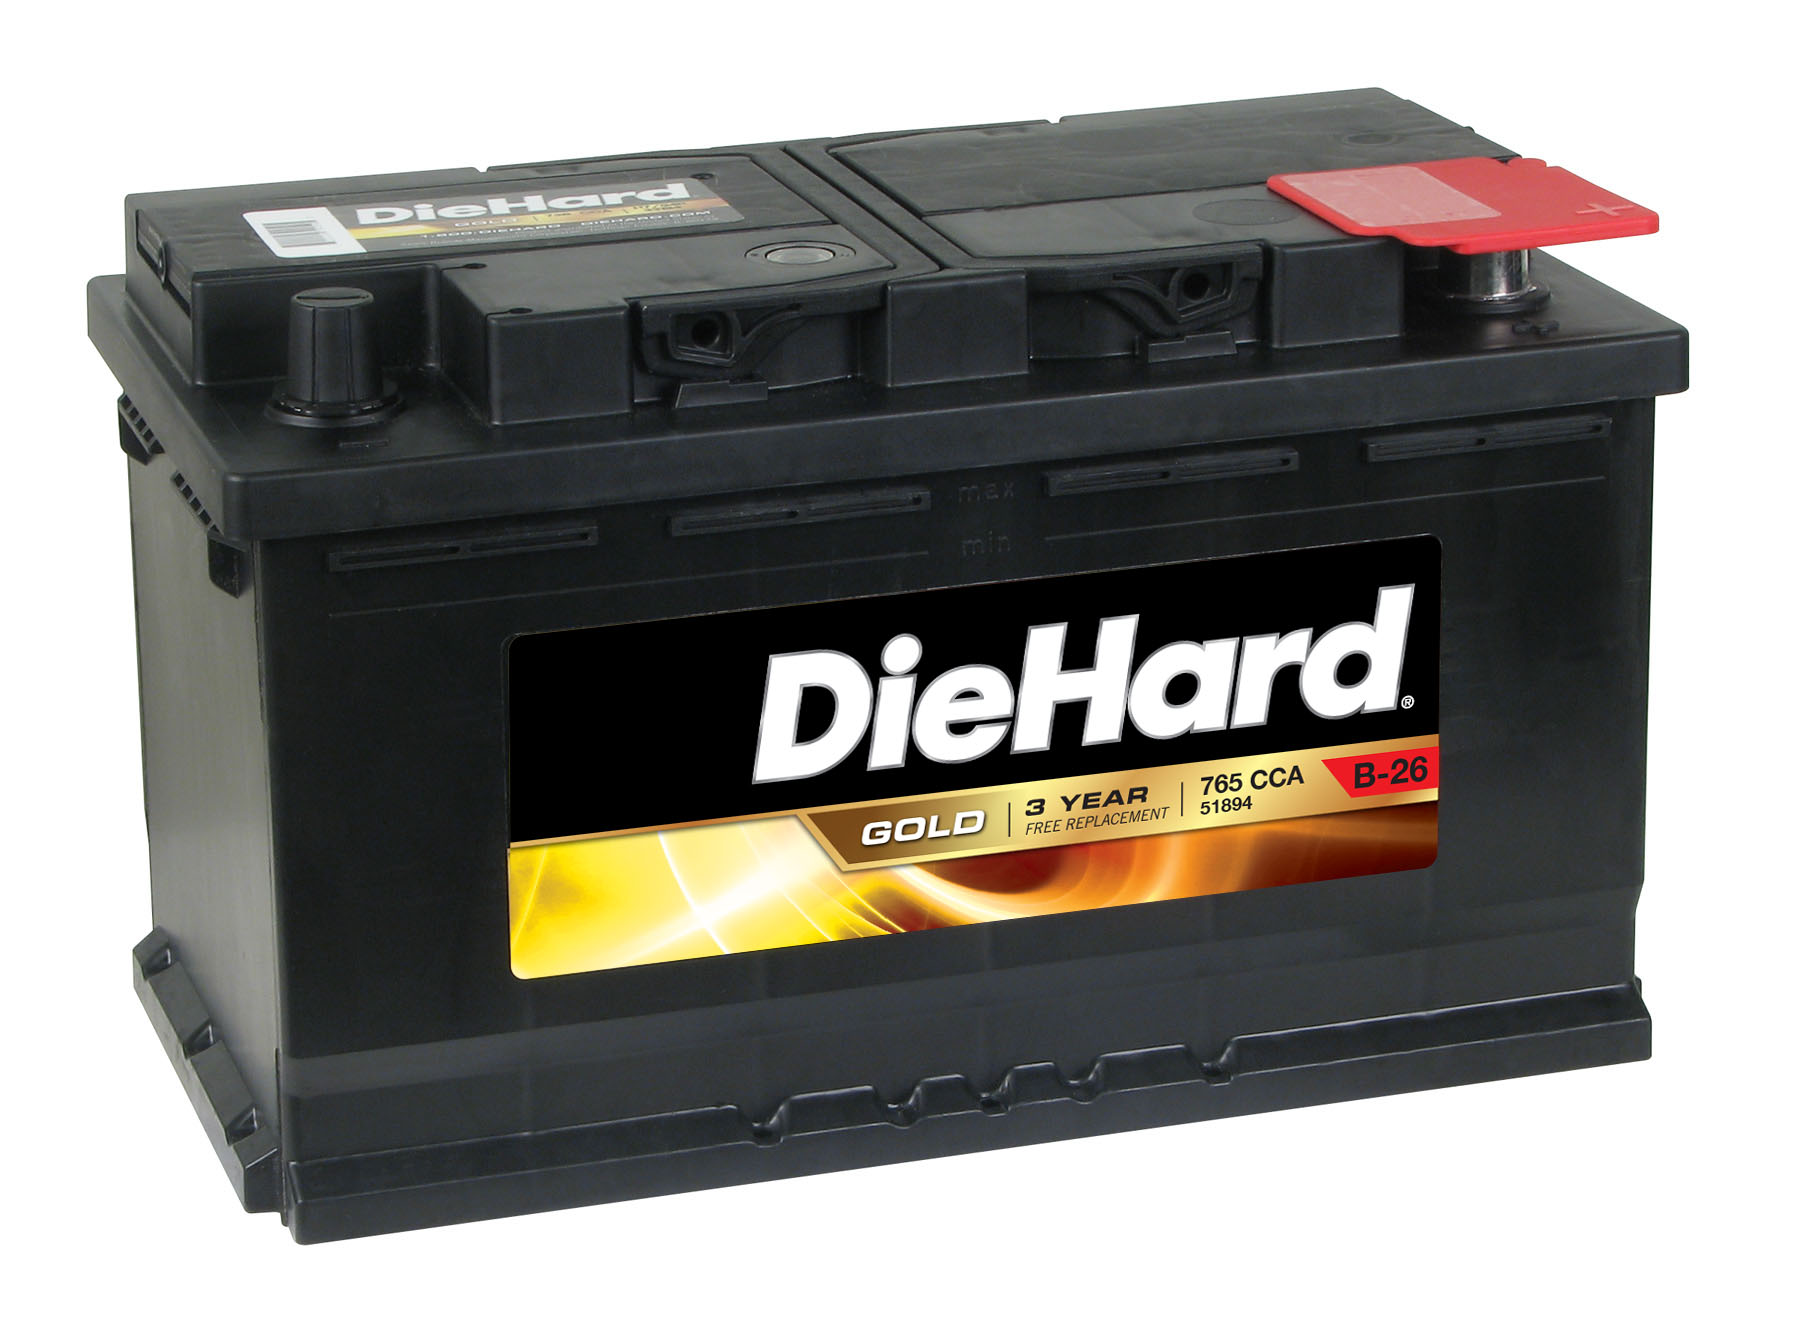 721112804057. Gold Automotive Battery - Group Size 94R (Price with Exchange...